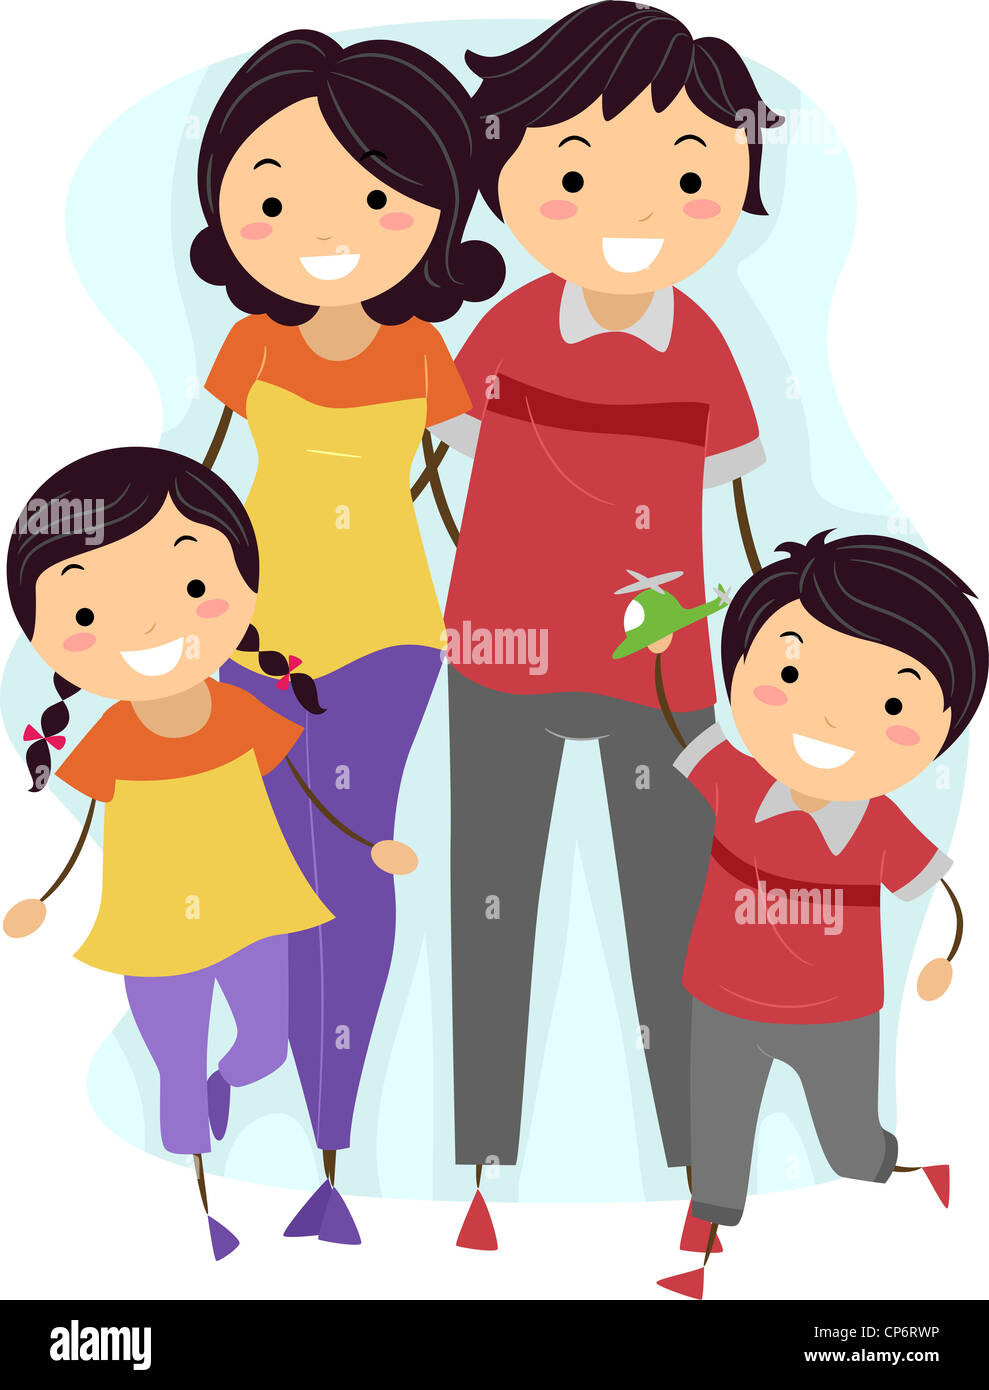 Illustration of a Family Wearing Matching Outfits Stock Photo